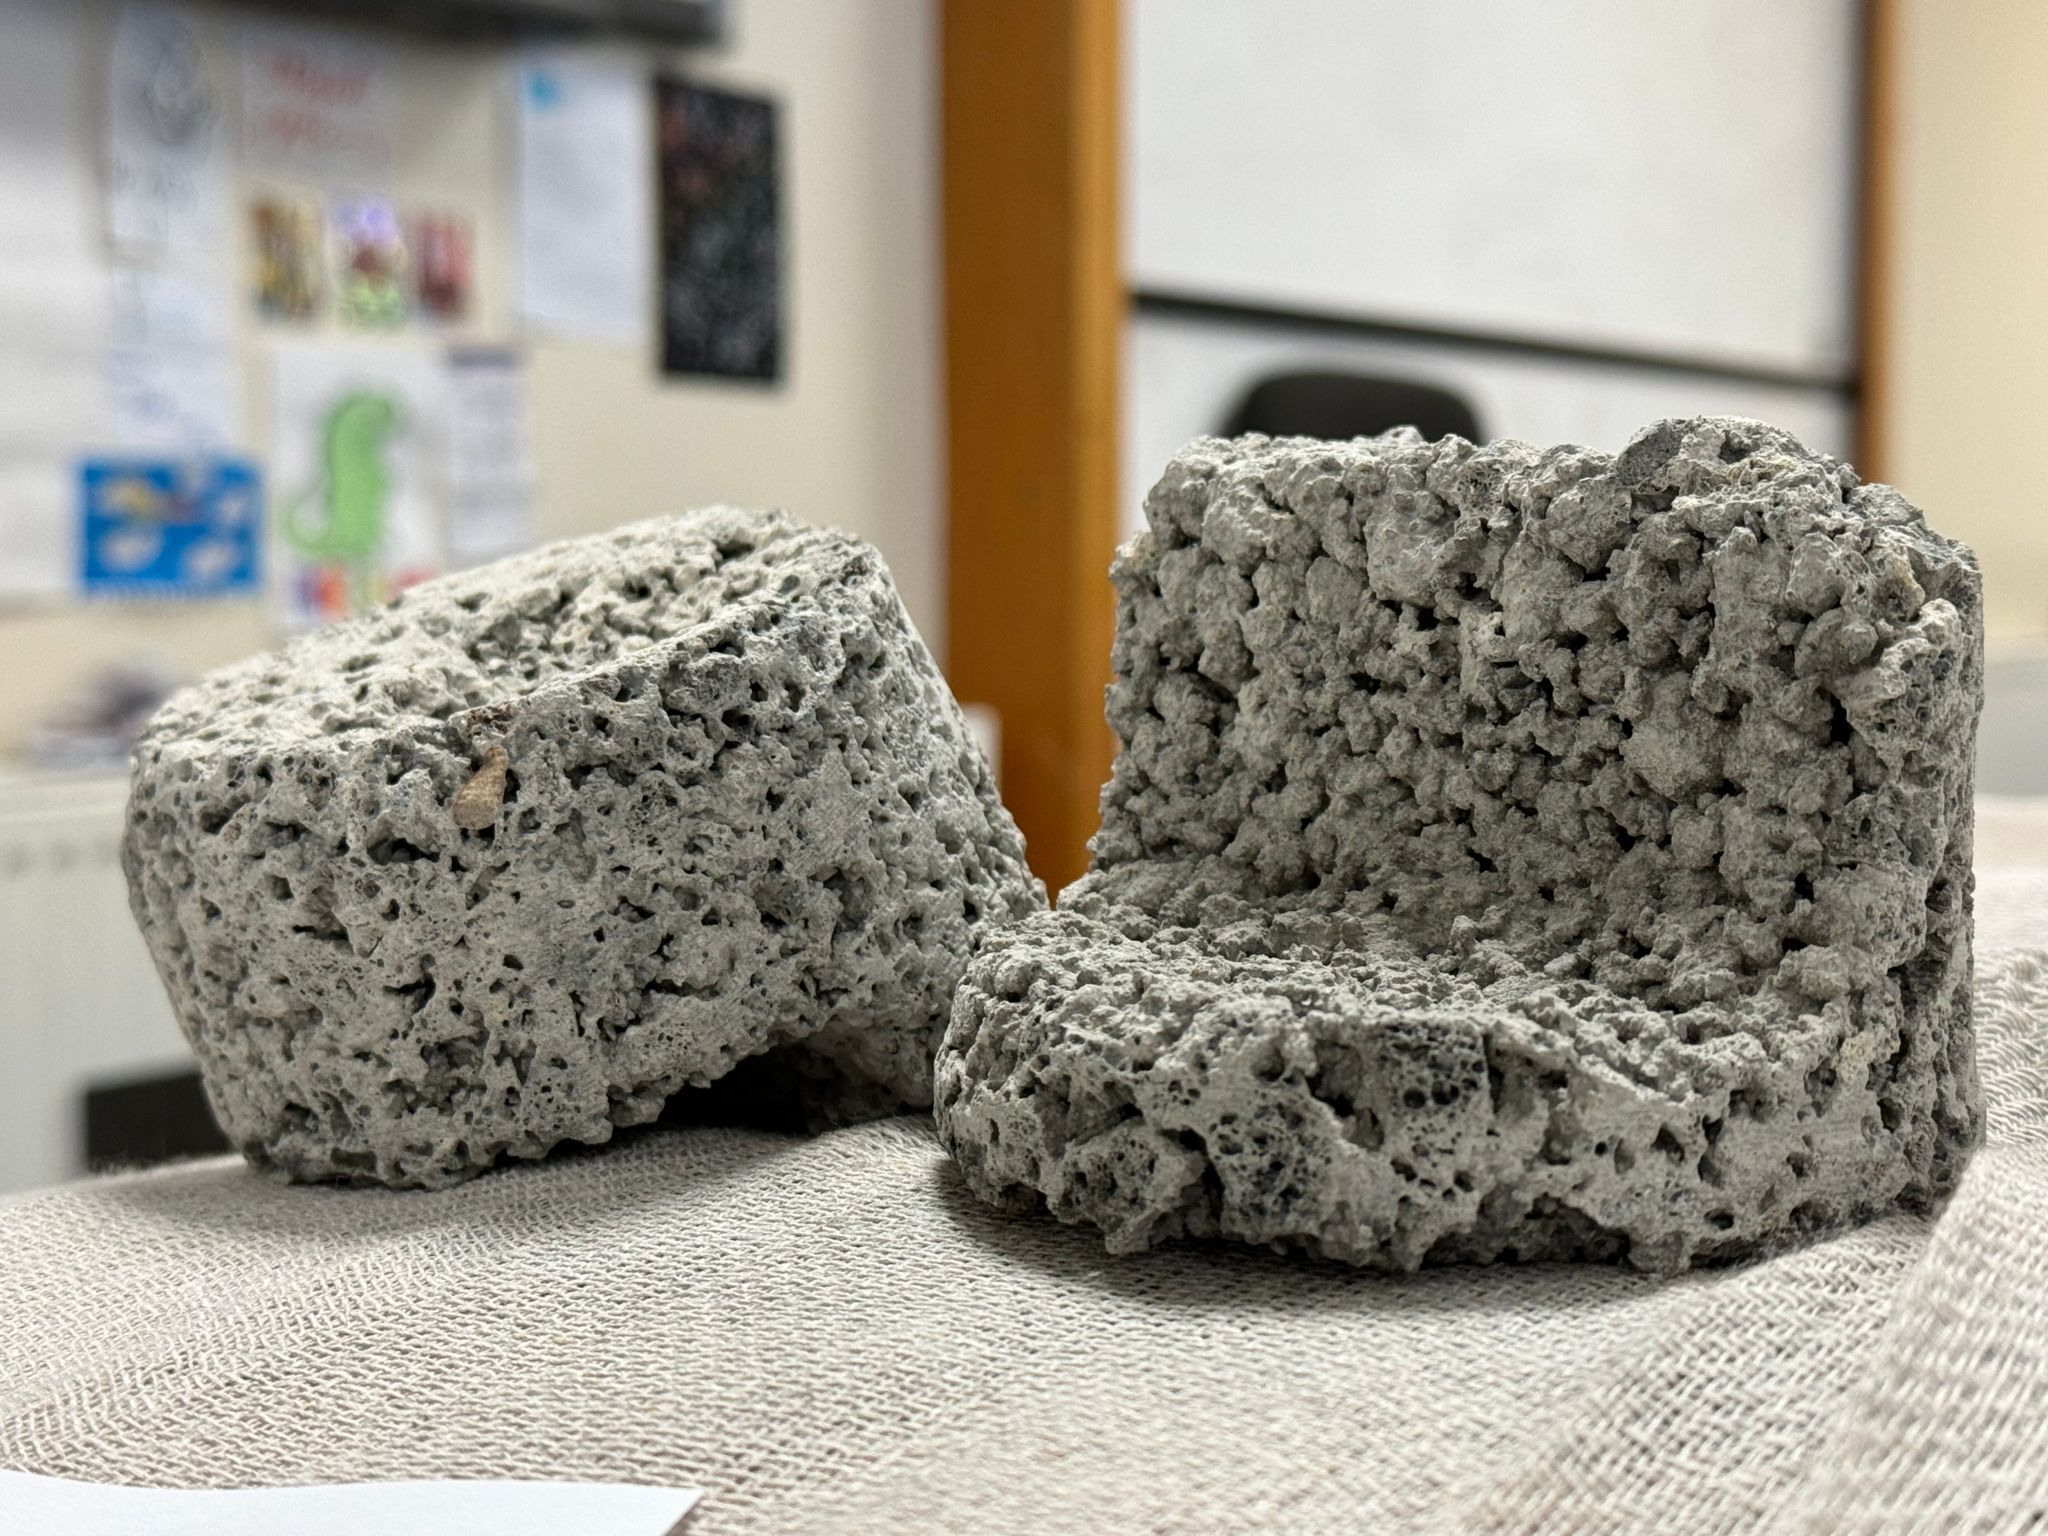 Samples of concrete taking from a ceiling at Churchill Community College